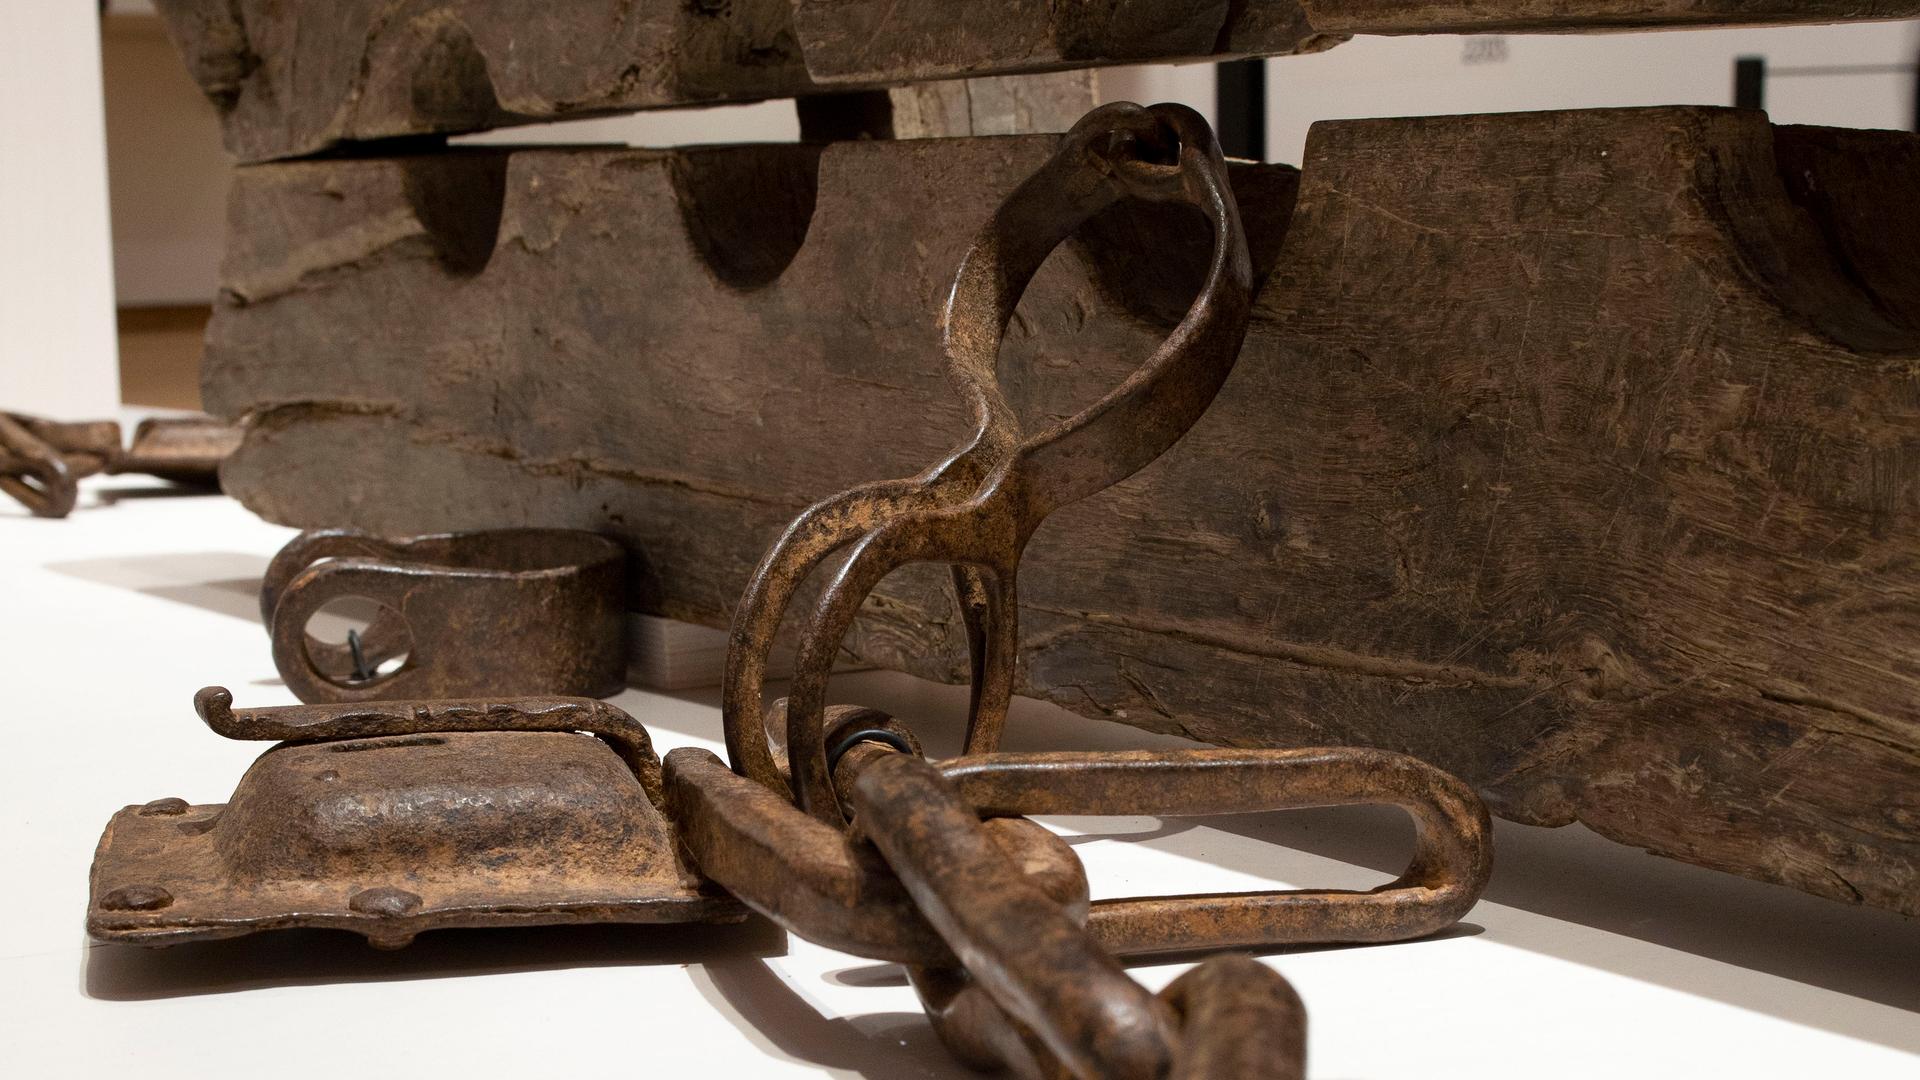 Tronco, or multiple foot stocks used to to constrain enslaved people